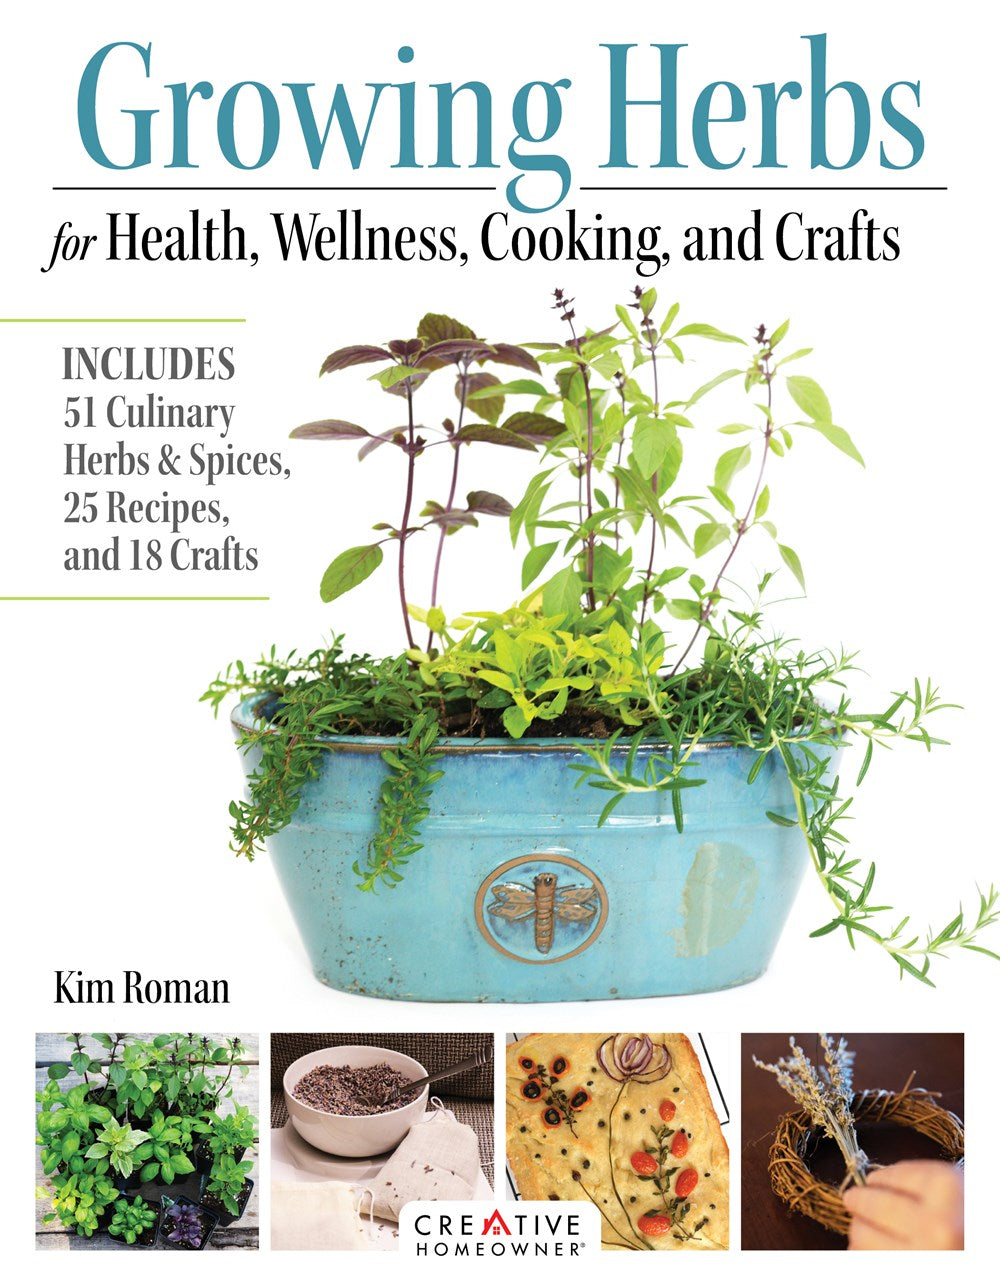 GROWING HERBS FOR HEALTH, WELLNESS, COOKING, AND CRAFTS